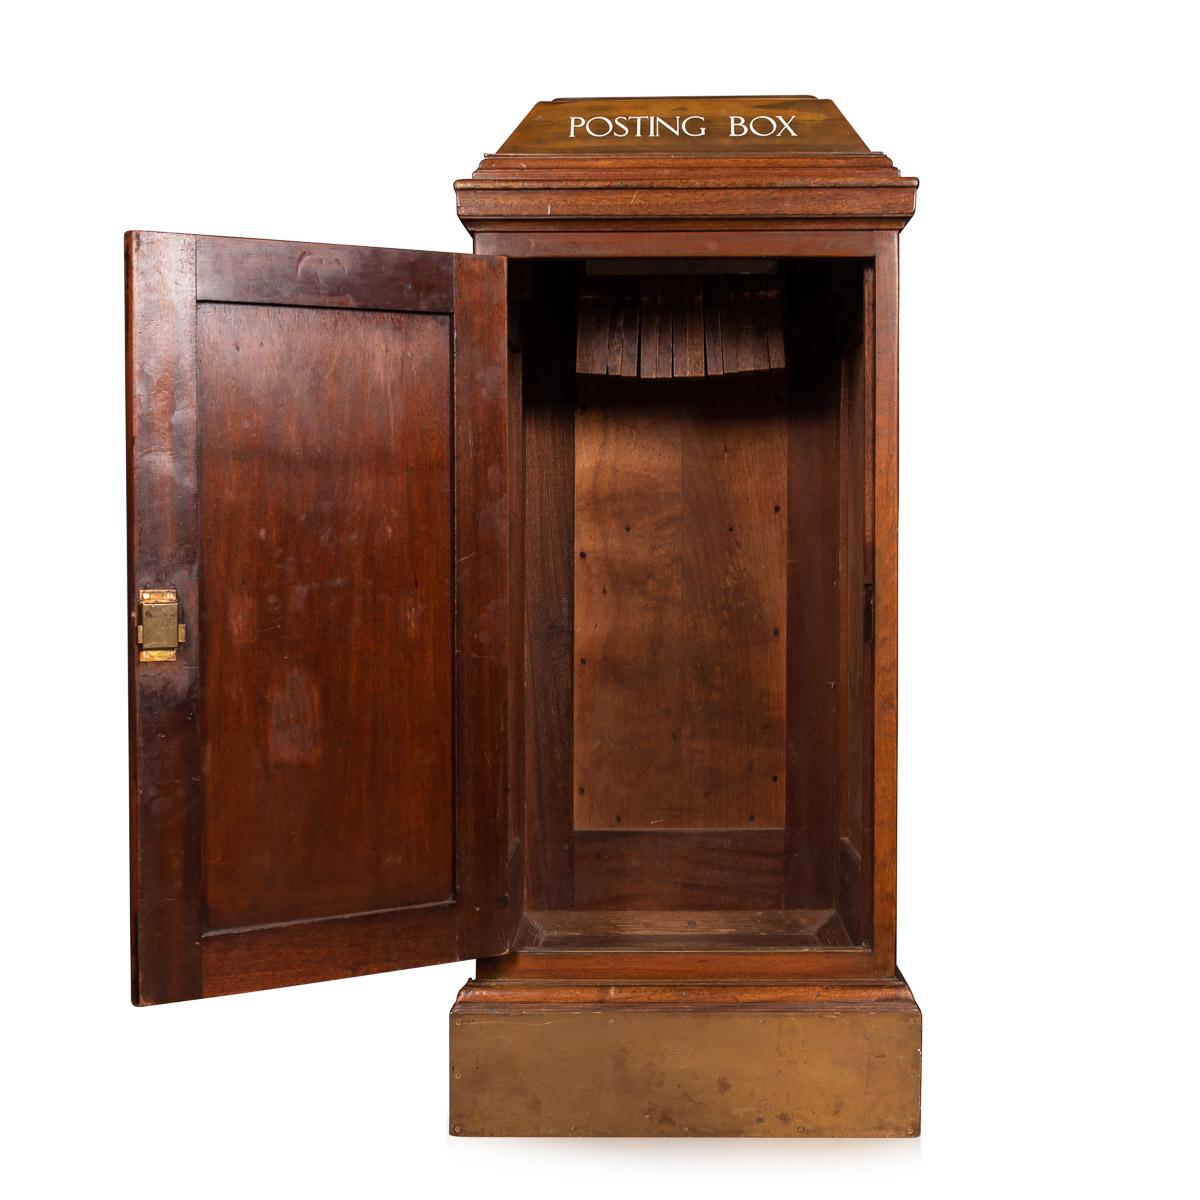 Antique 19th century English hotel post box constructed in solid mahogany with a brass letter box, a hindges door with a lock and key. Post boxes of this size were usually installed in large hotels and gentlemen's clubs.

Beautiful piece of period